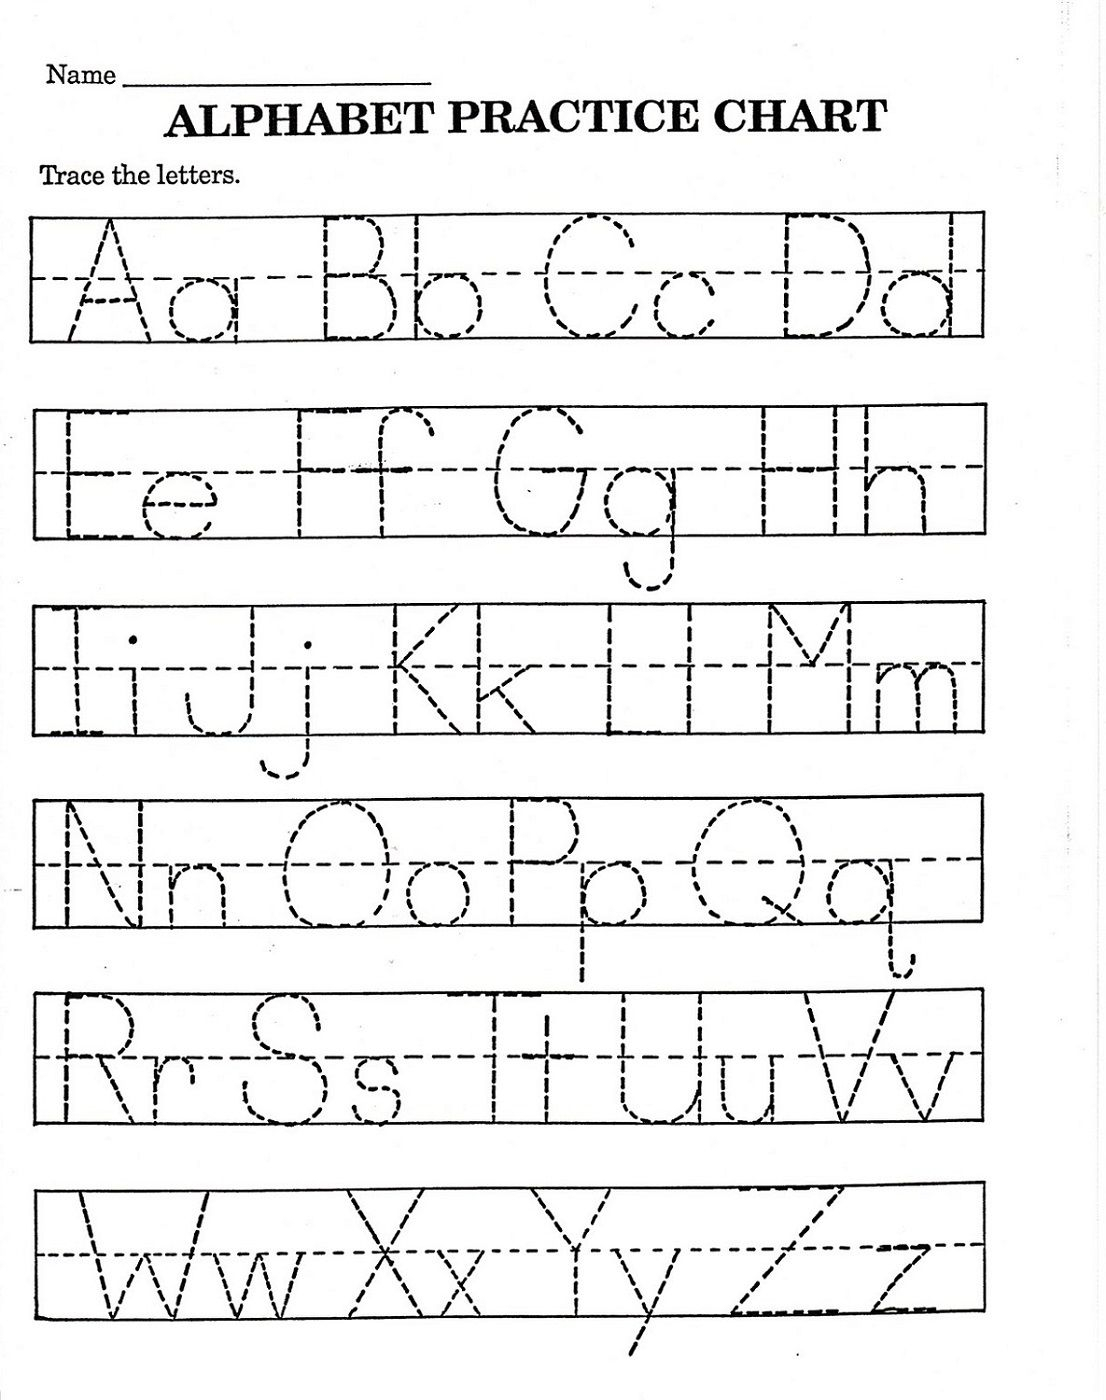 Trace Letter Worksheets Free | Alphabet Tracing Worksheets intended for Tracing Of Letters Worksheets